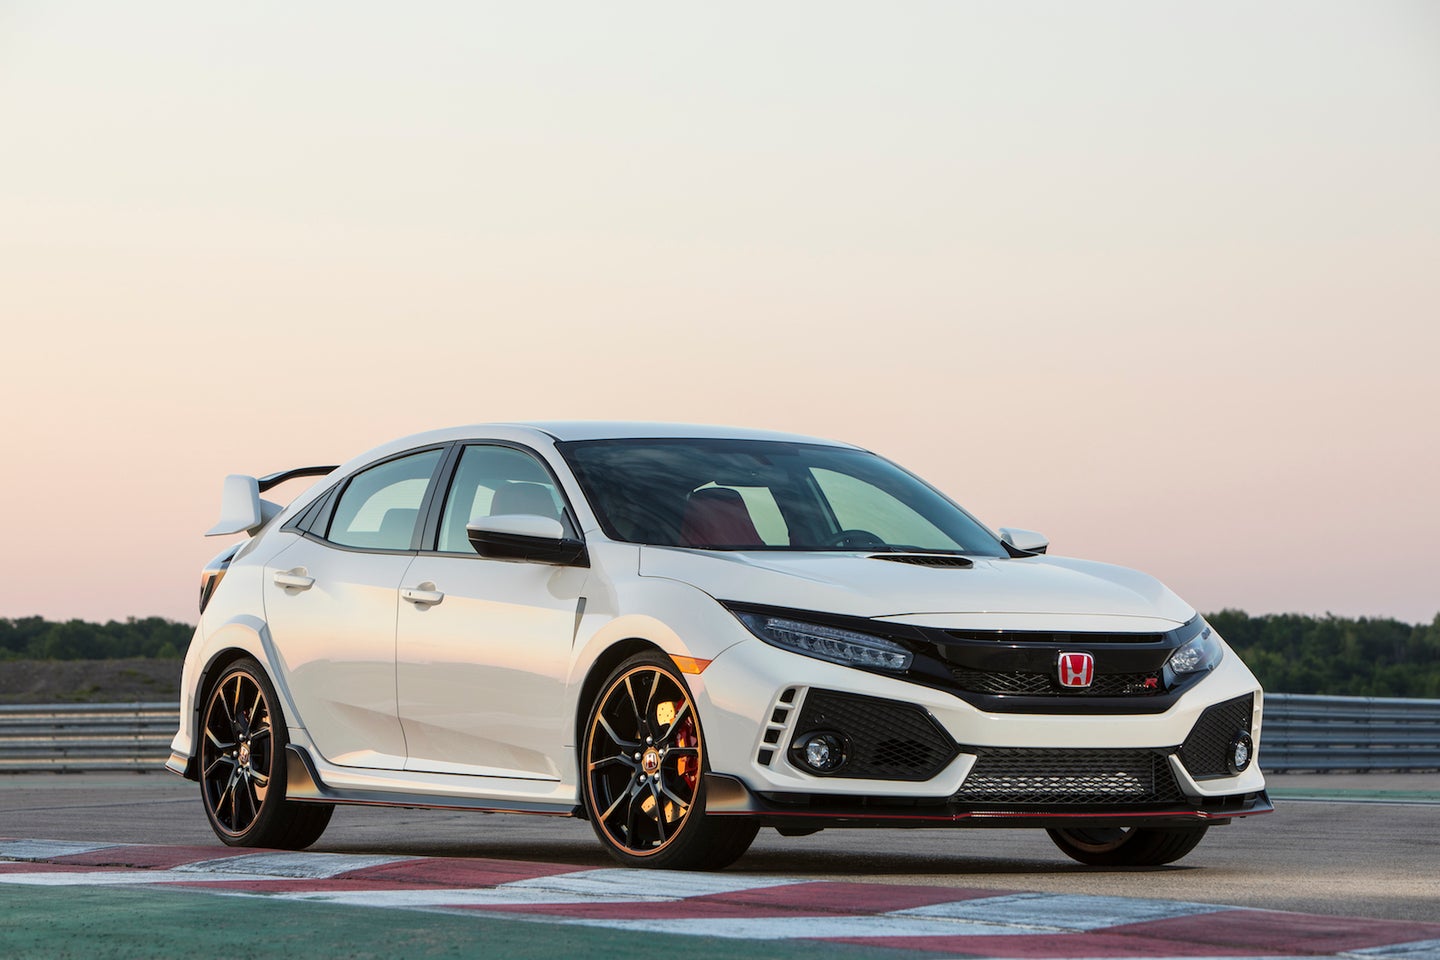 Watch a Fox Reporter Botch a Review of the Civic Type R